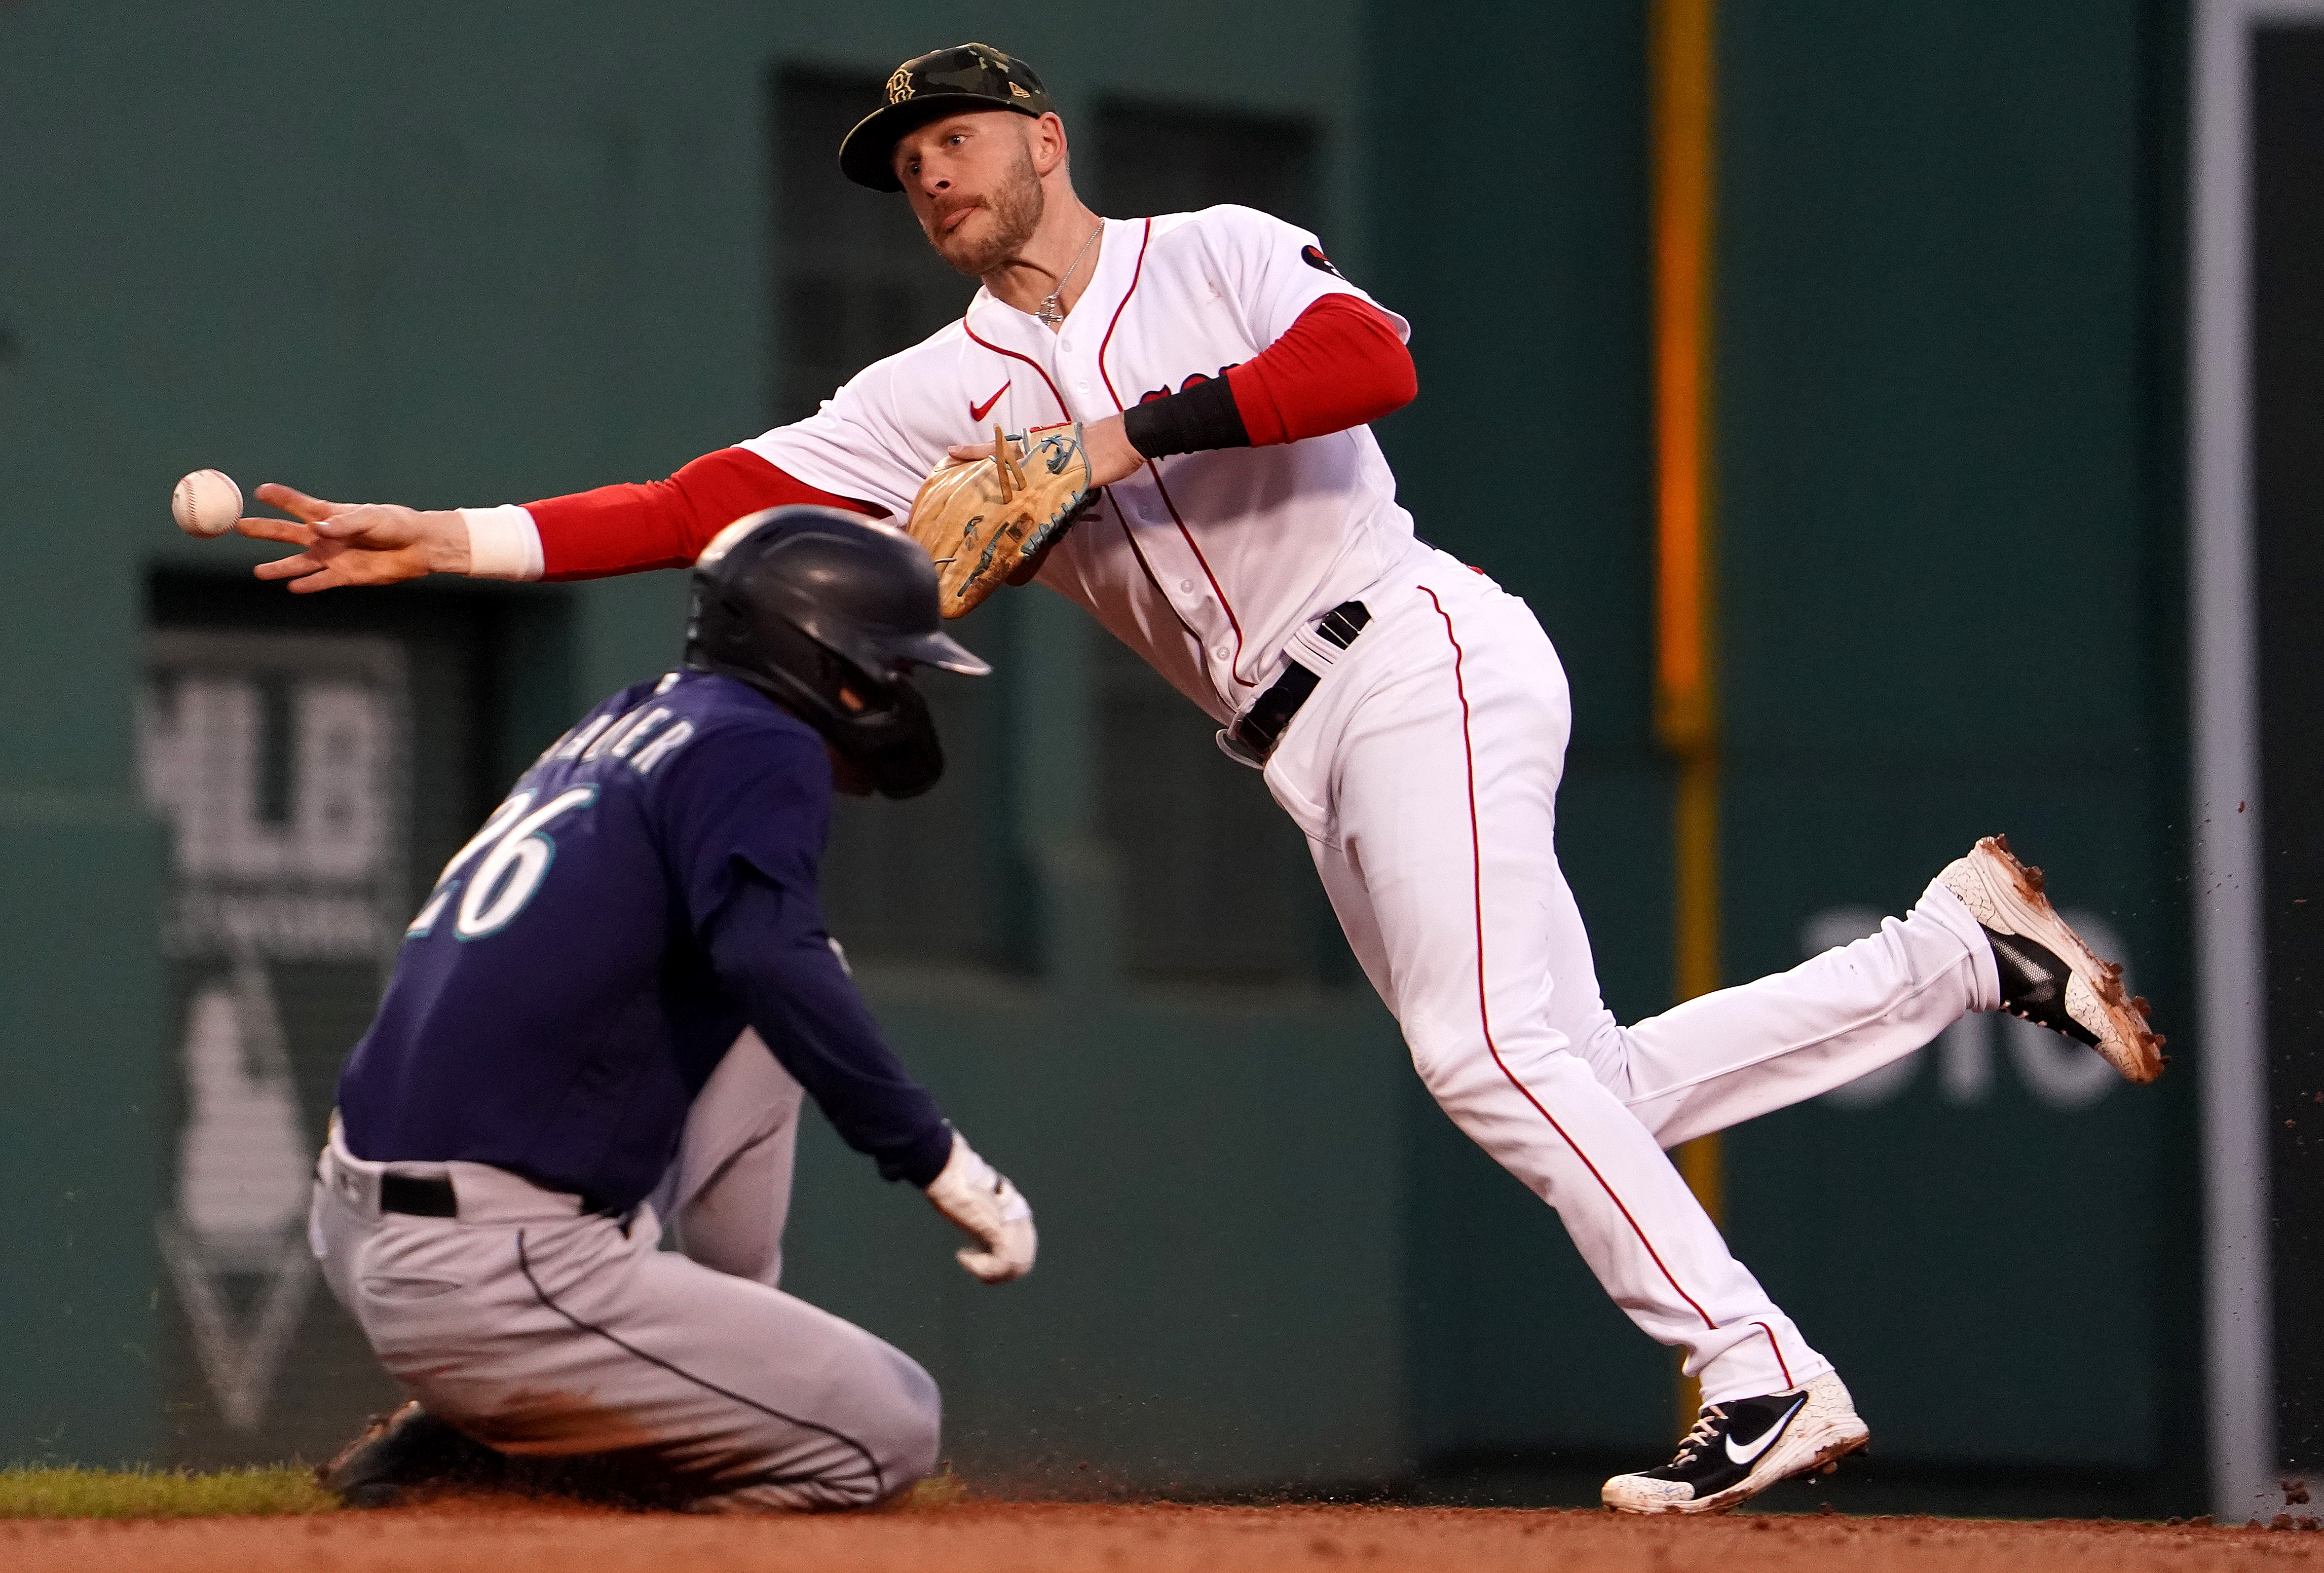 A look at Trevor Story's first day with the Red Sox - The Boston Globe